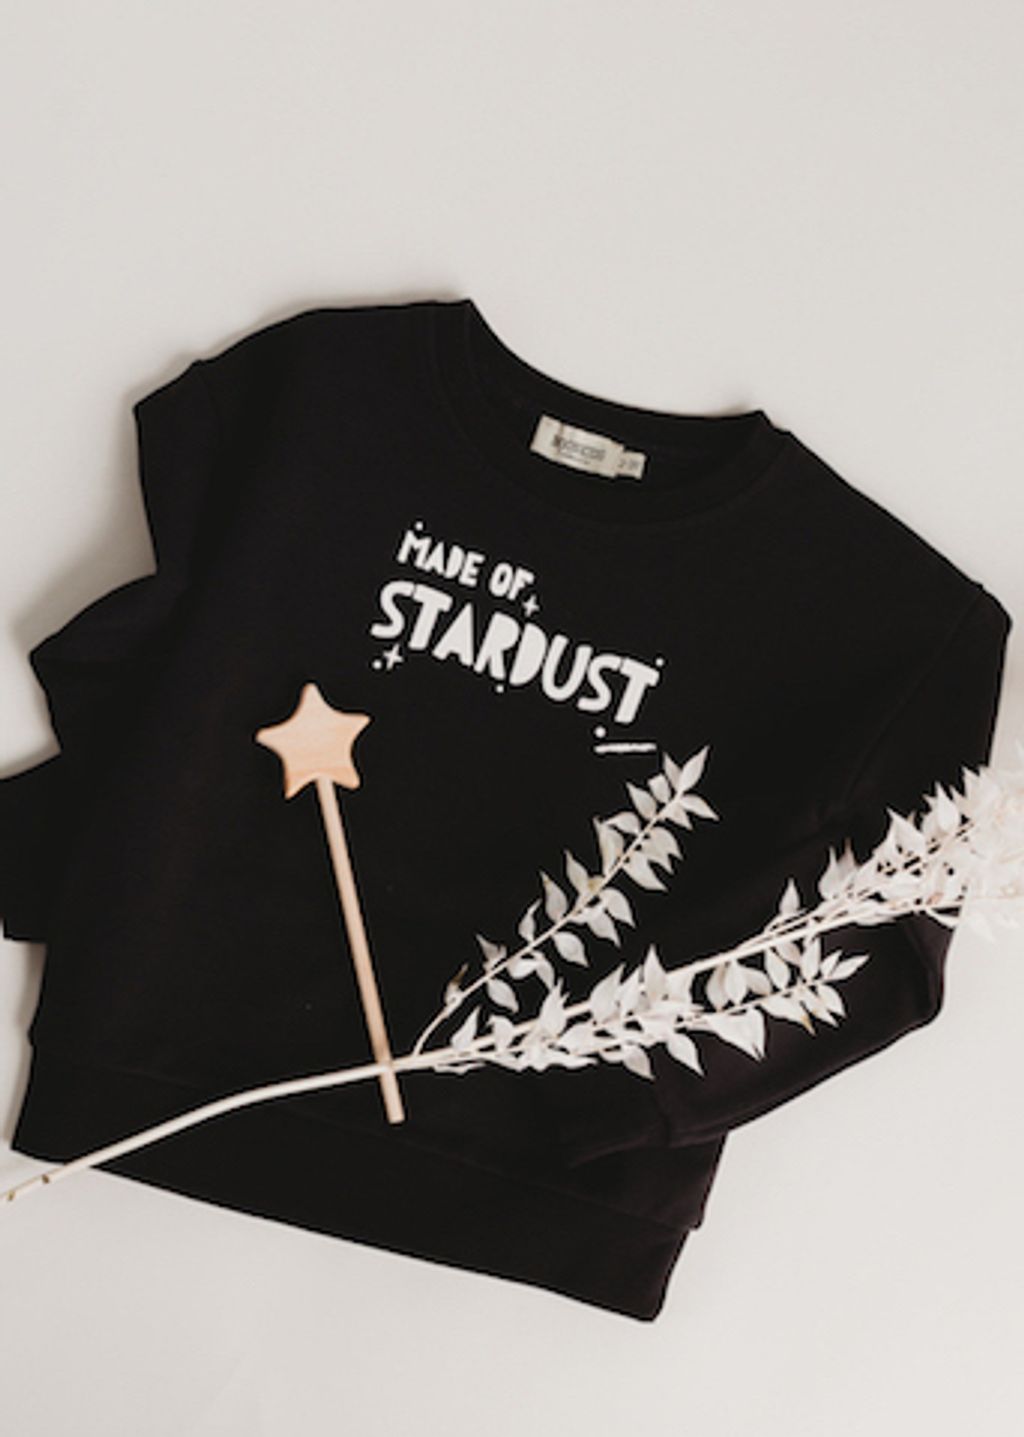 Stardust Jumper Product_MoonKids Collective.jpg